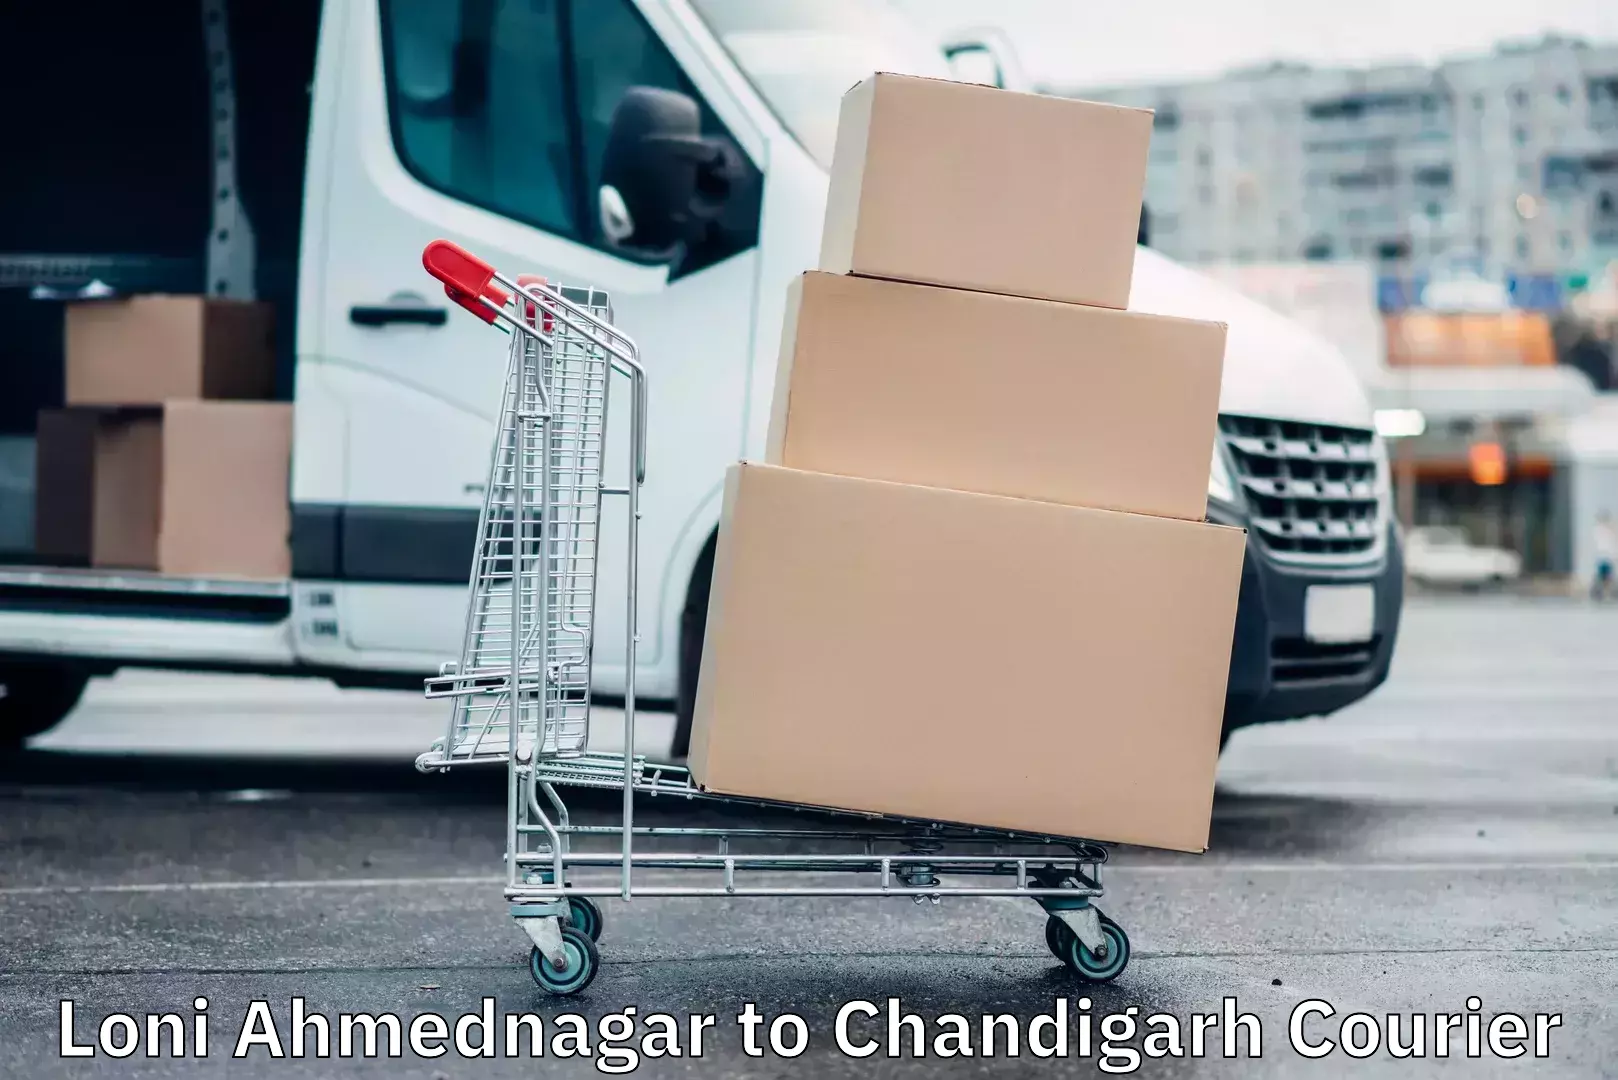 On-demand delivery Loni Ahmednagar to Chandigarh